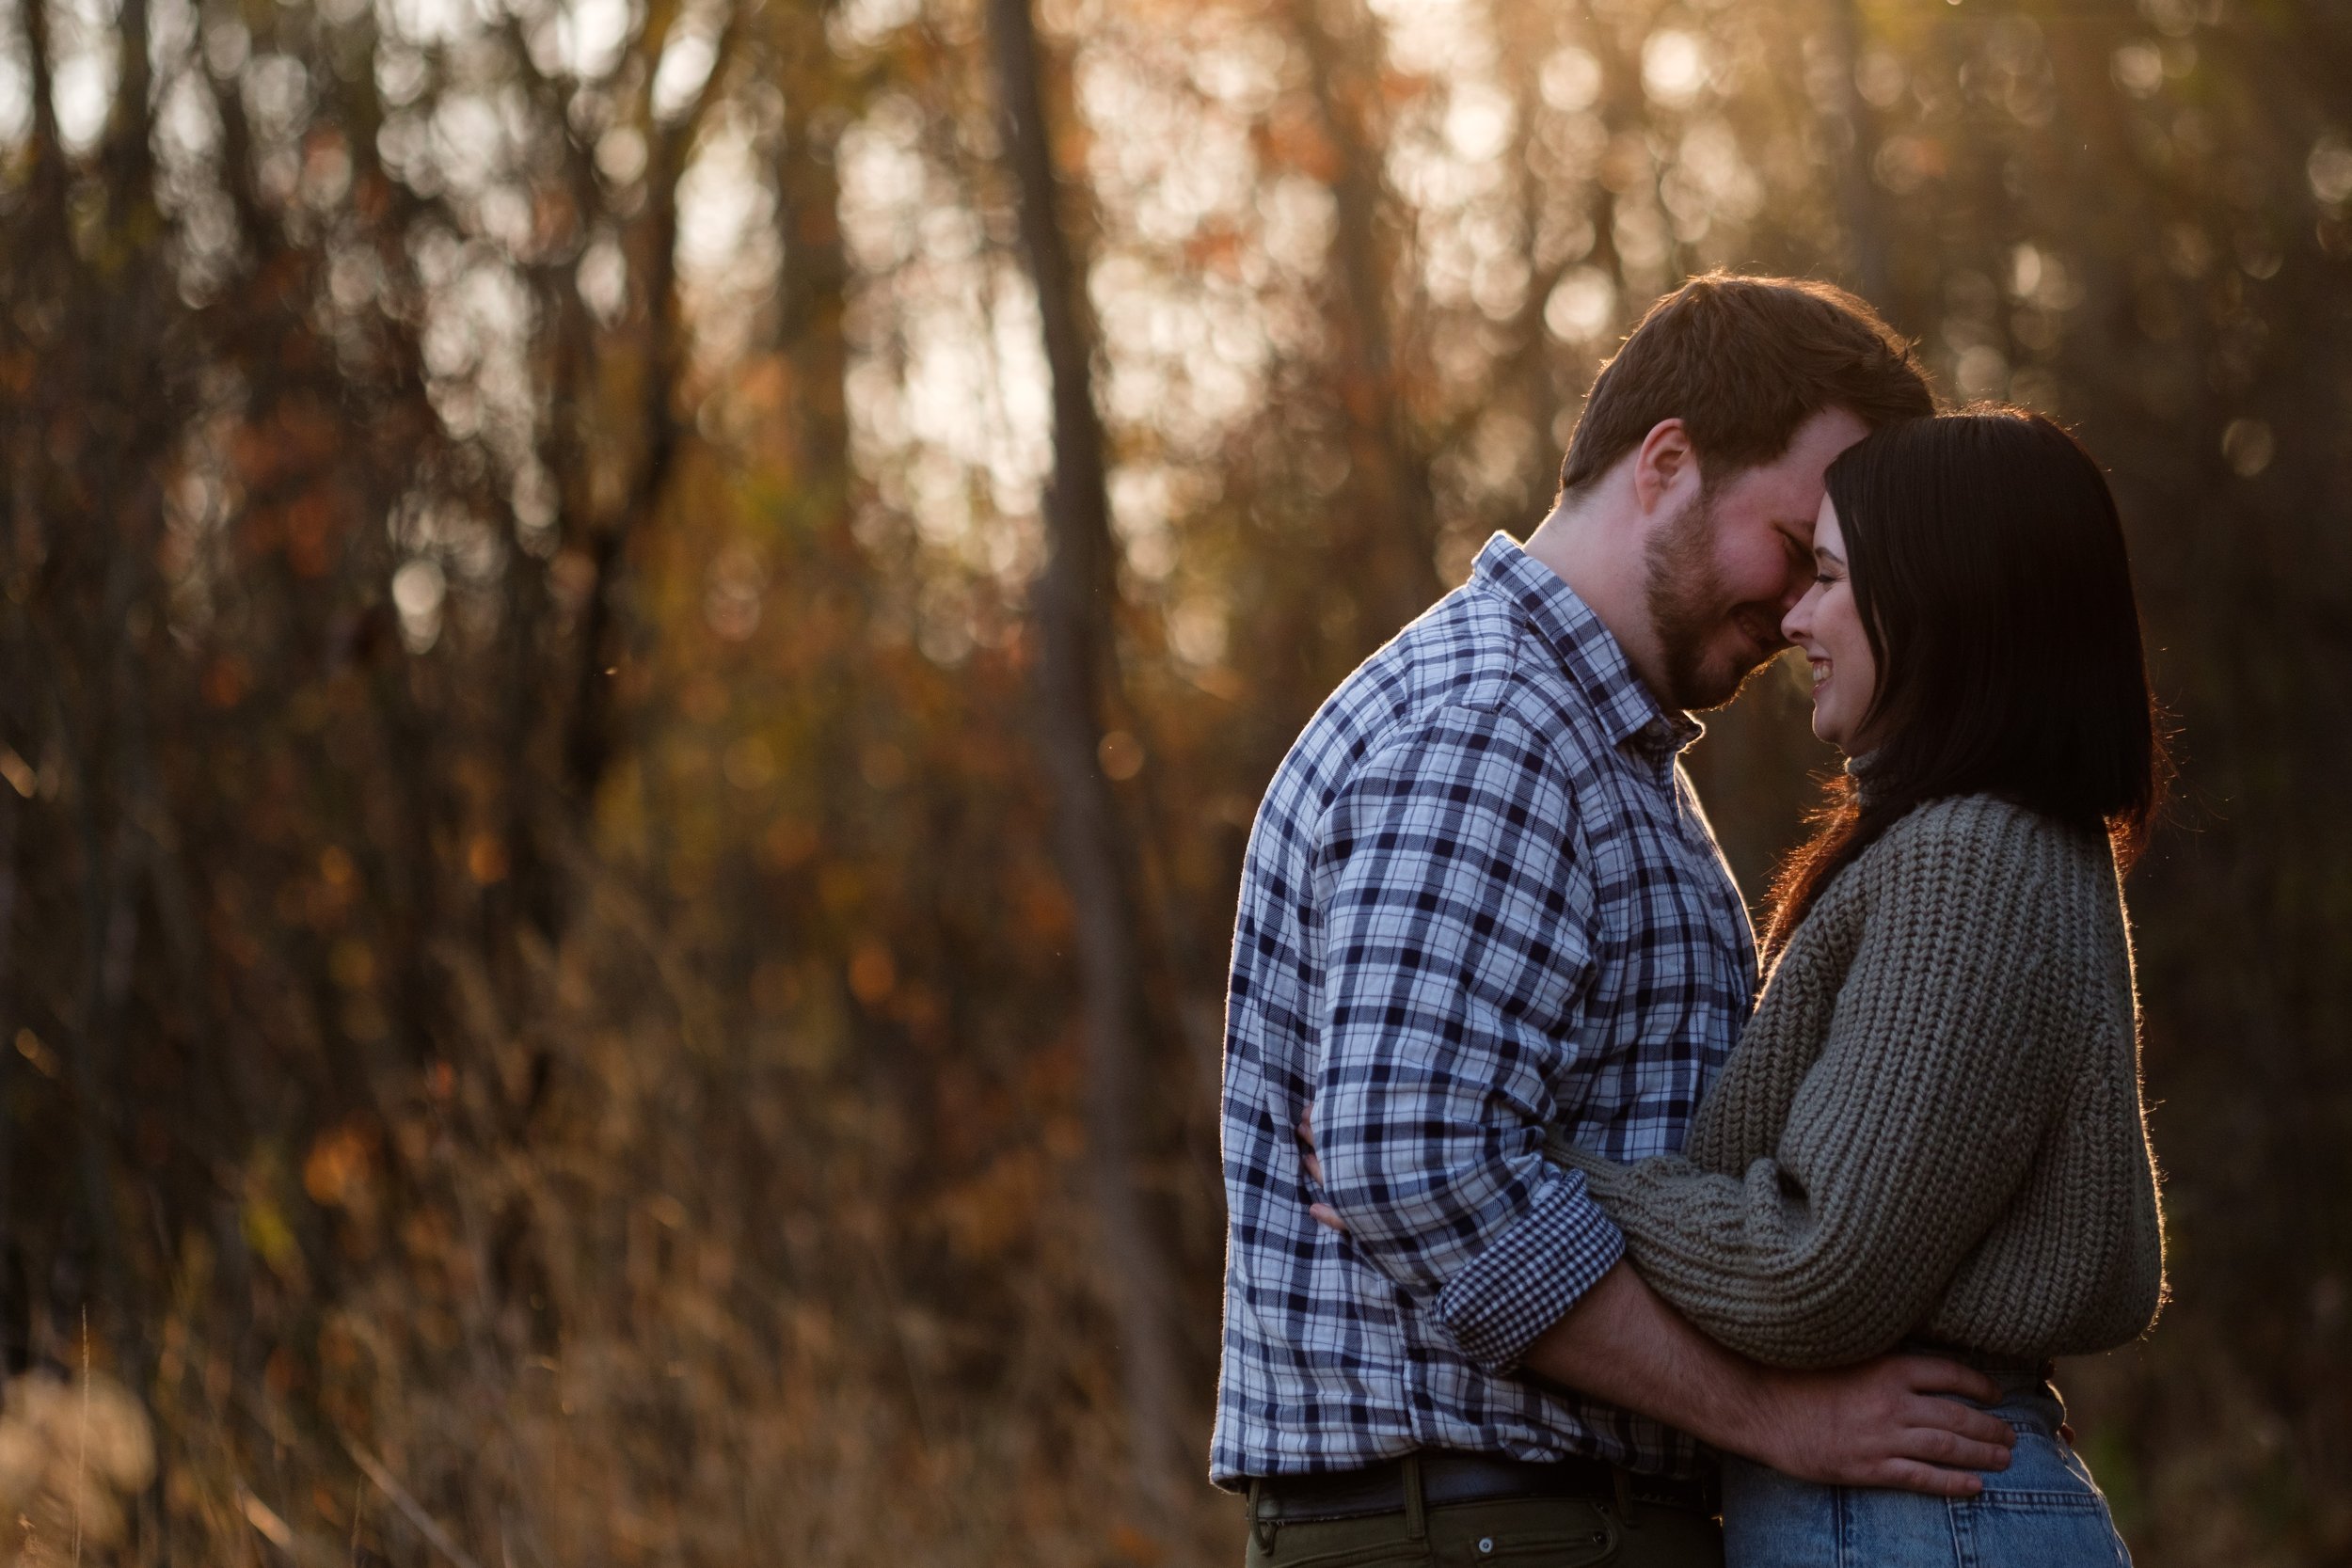  A colour engagement photograph from Megan and Joshua’s engagement session at a nature trail in Cambridge, Ontario by Toronto wedding photographer Scott Williams. 